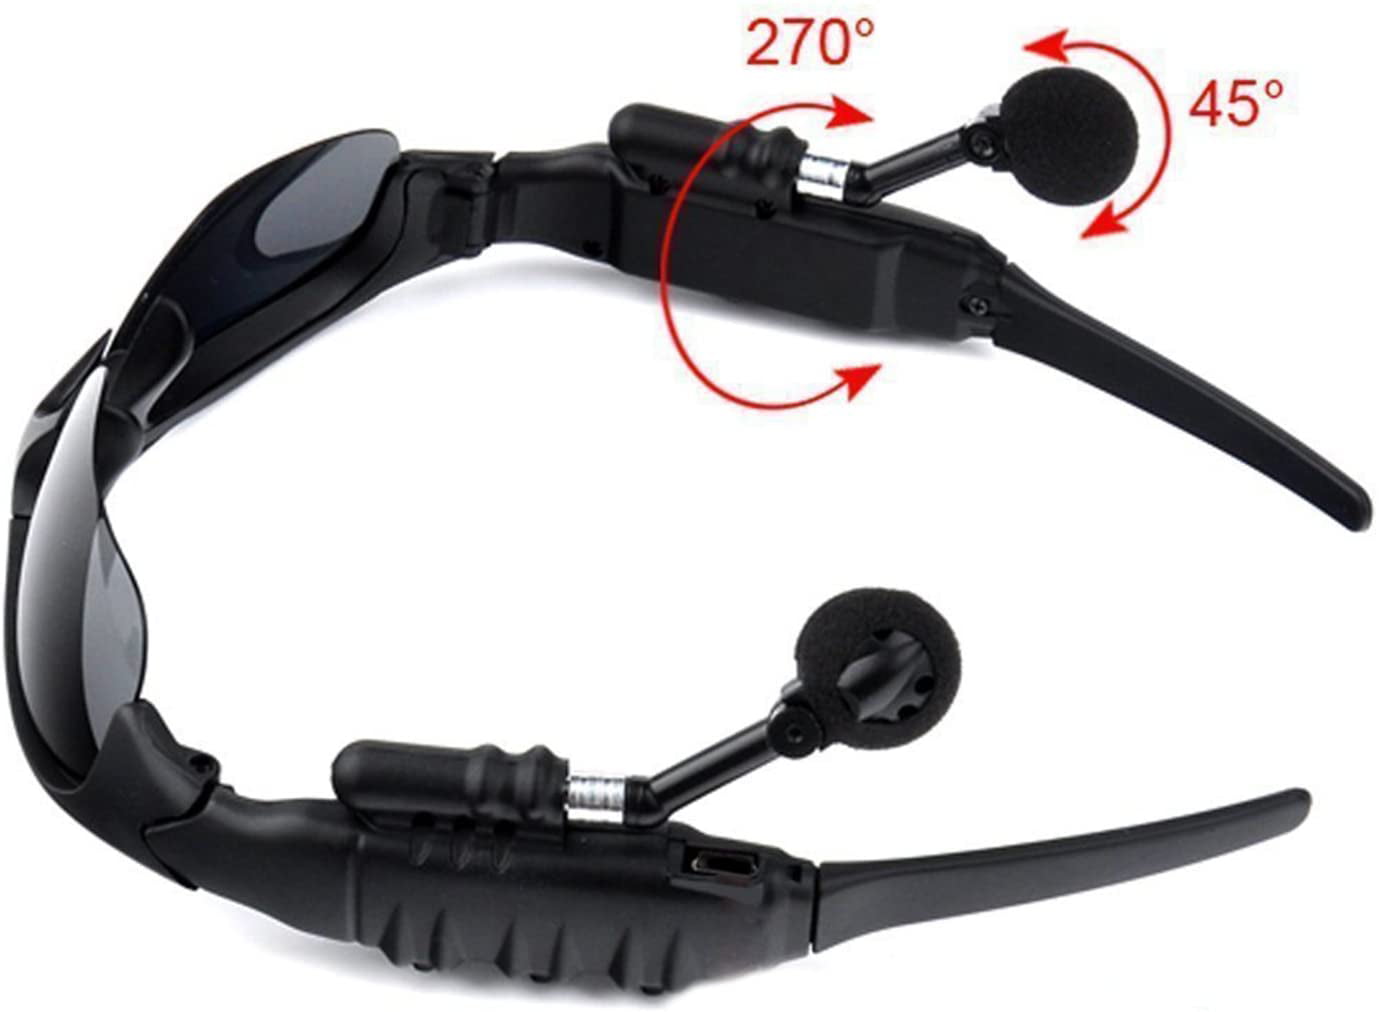 Compatible and with Bluetooth Samsung Phones Headset, Smart Other iPhone LG Sunglasses Techken